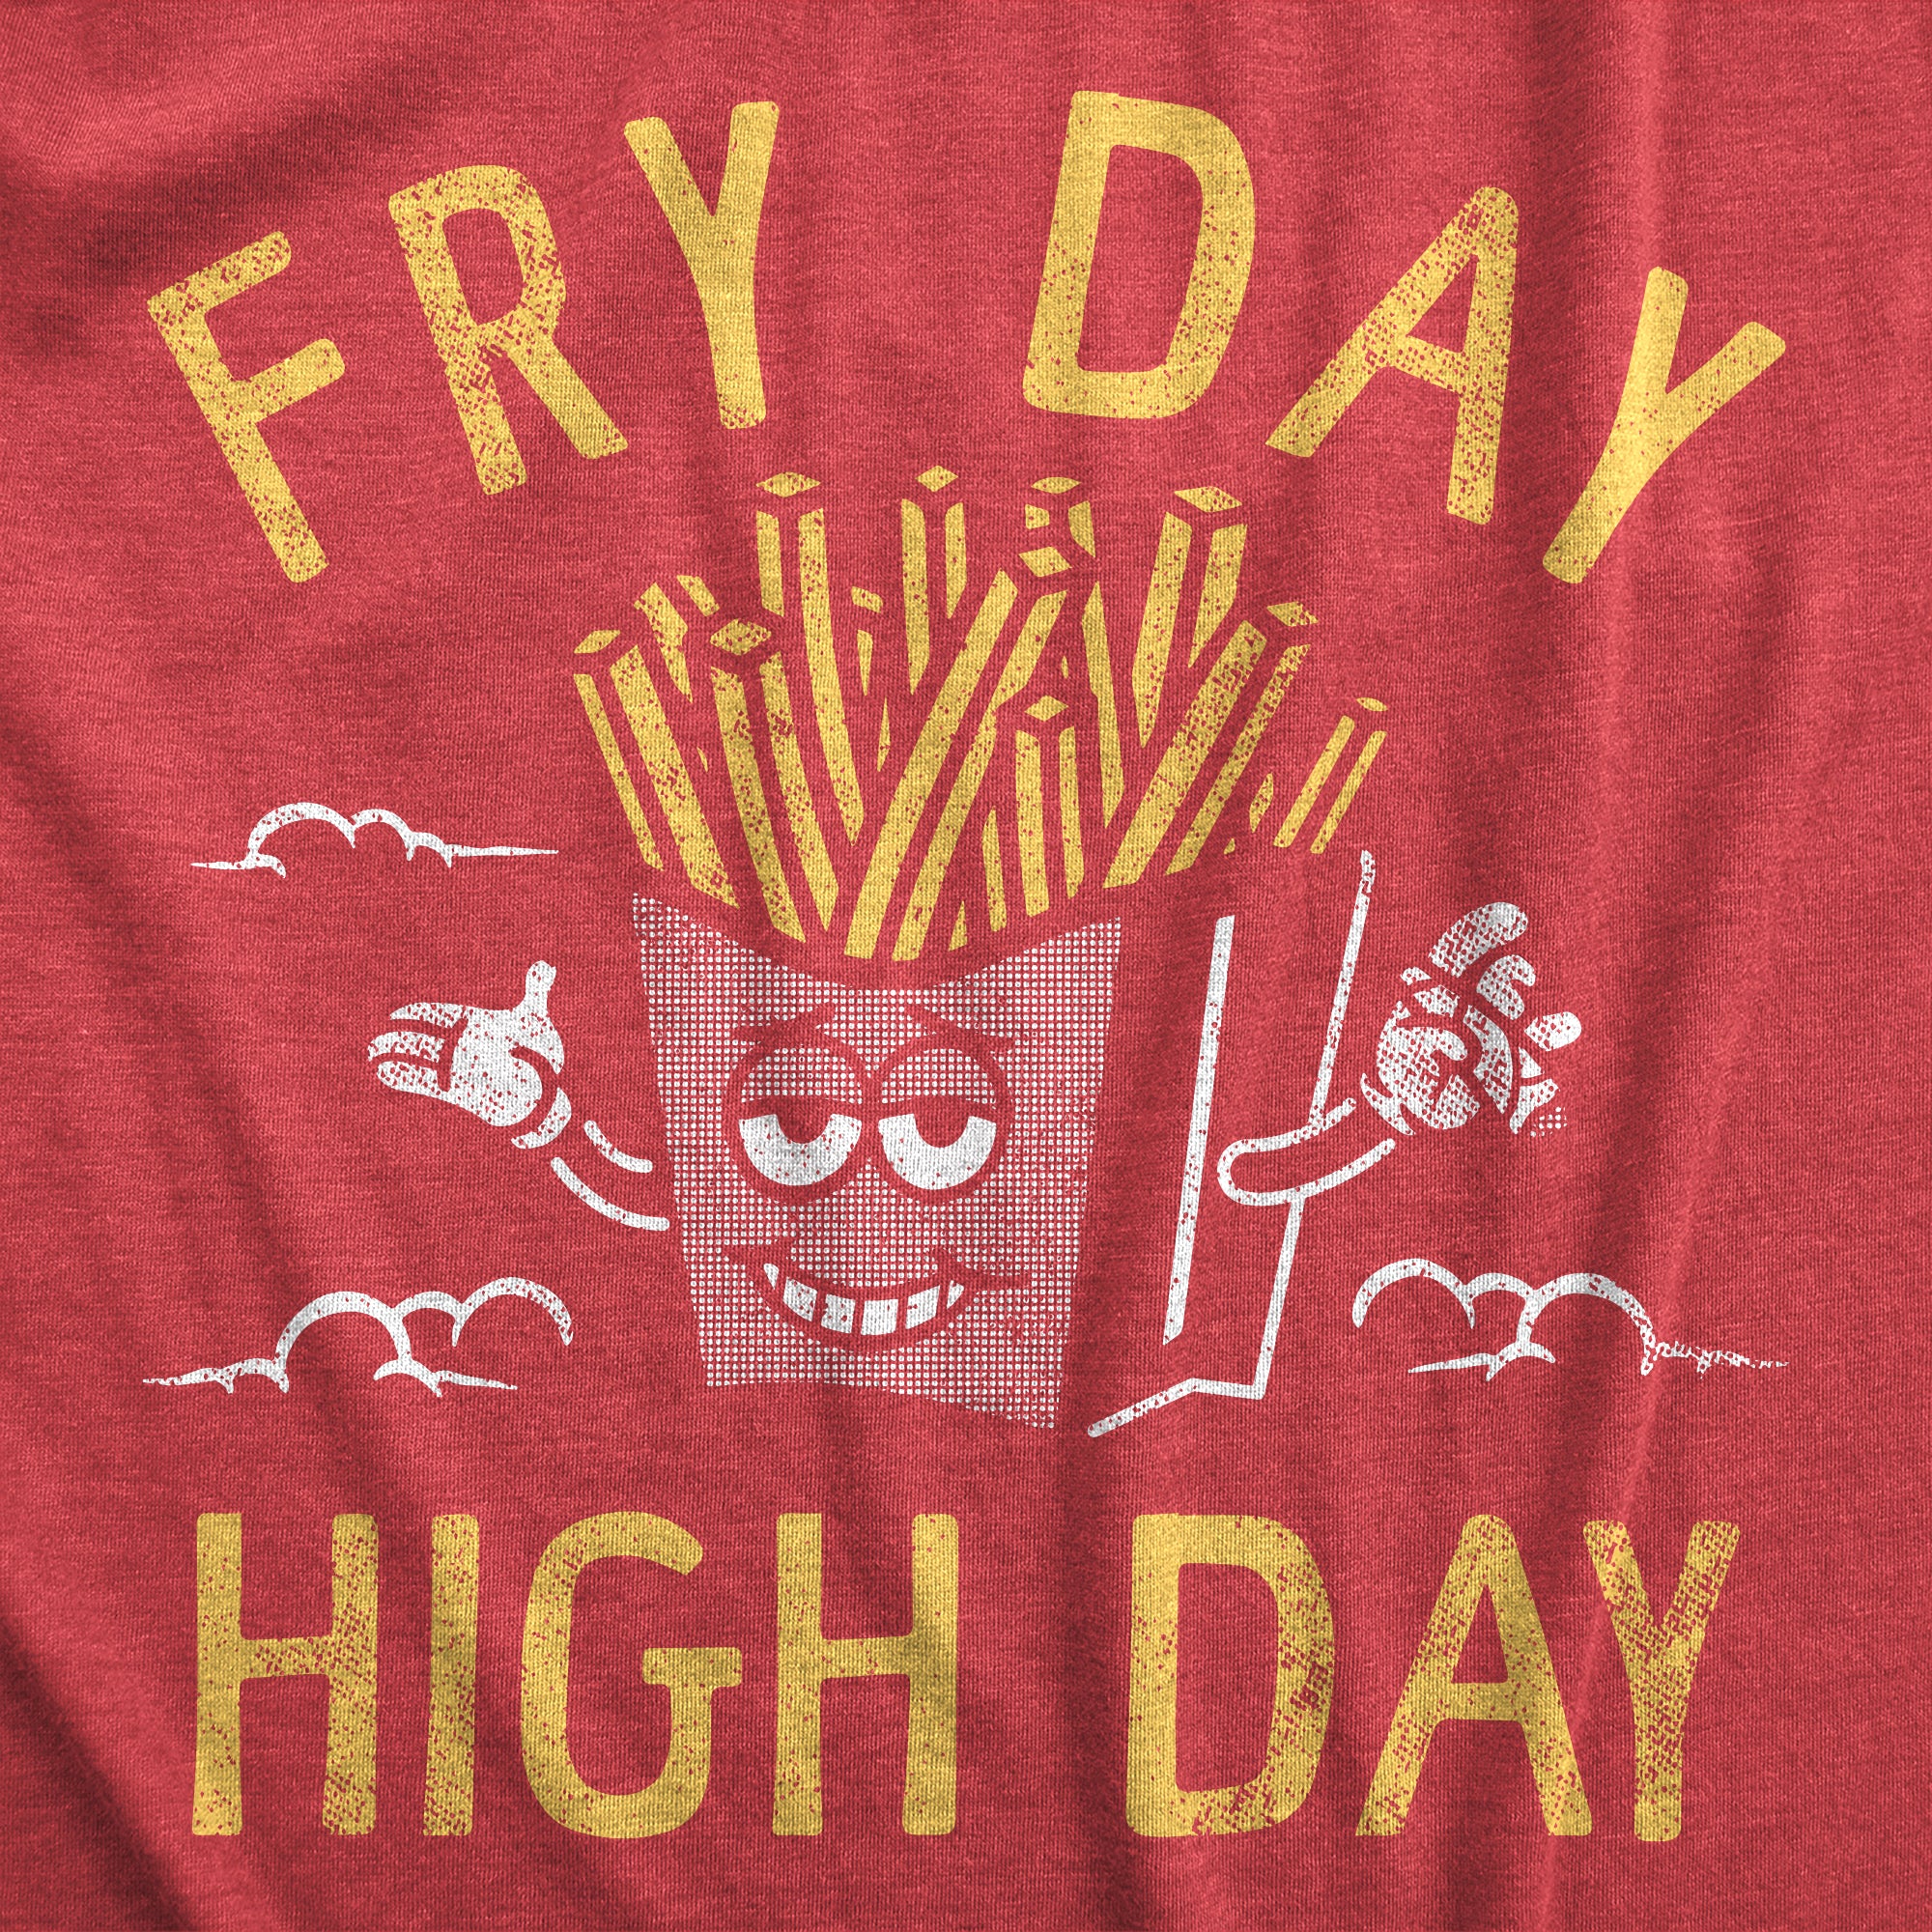 Funny Heather Red - FRY Fry Day High Day Womens T Shirt Nerdy 420 Food Tee